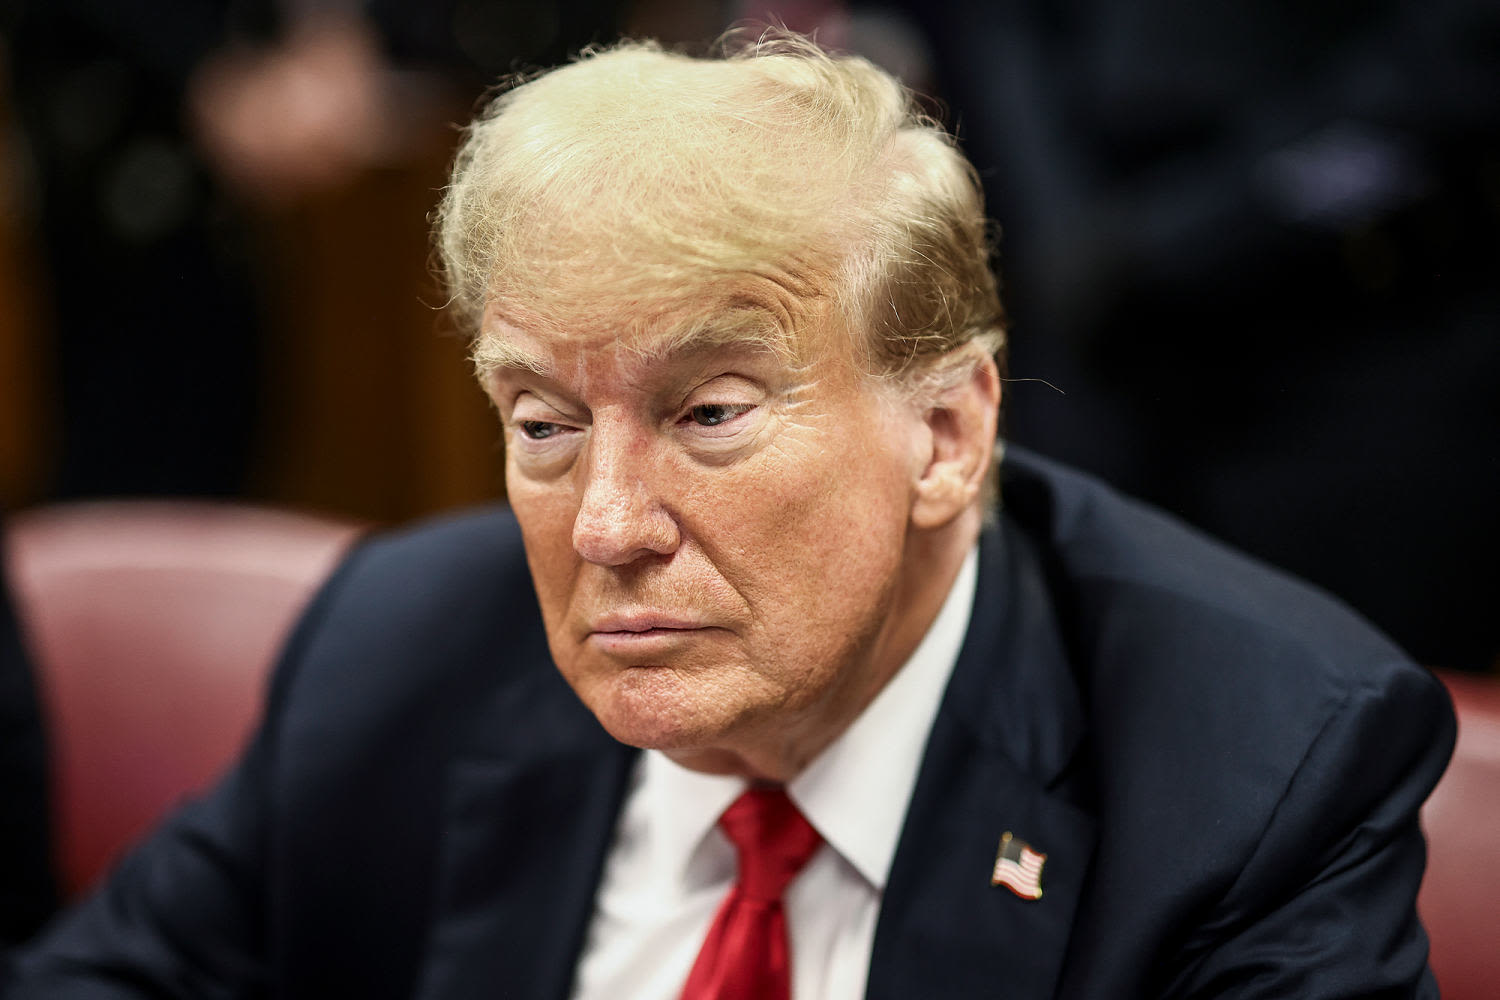 Trump gobsmacked by reality on Biden's imaginary role in prosecutions